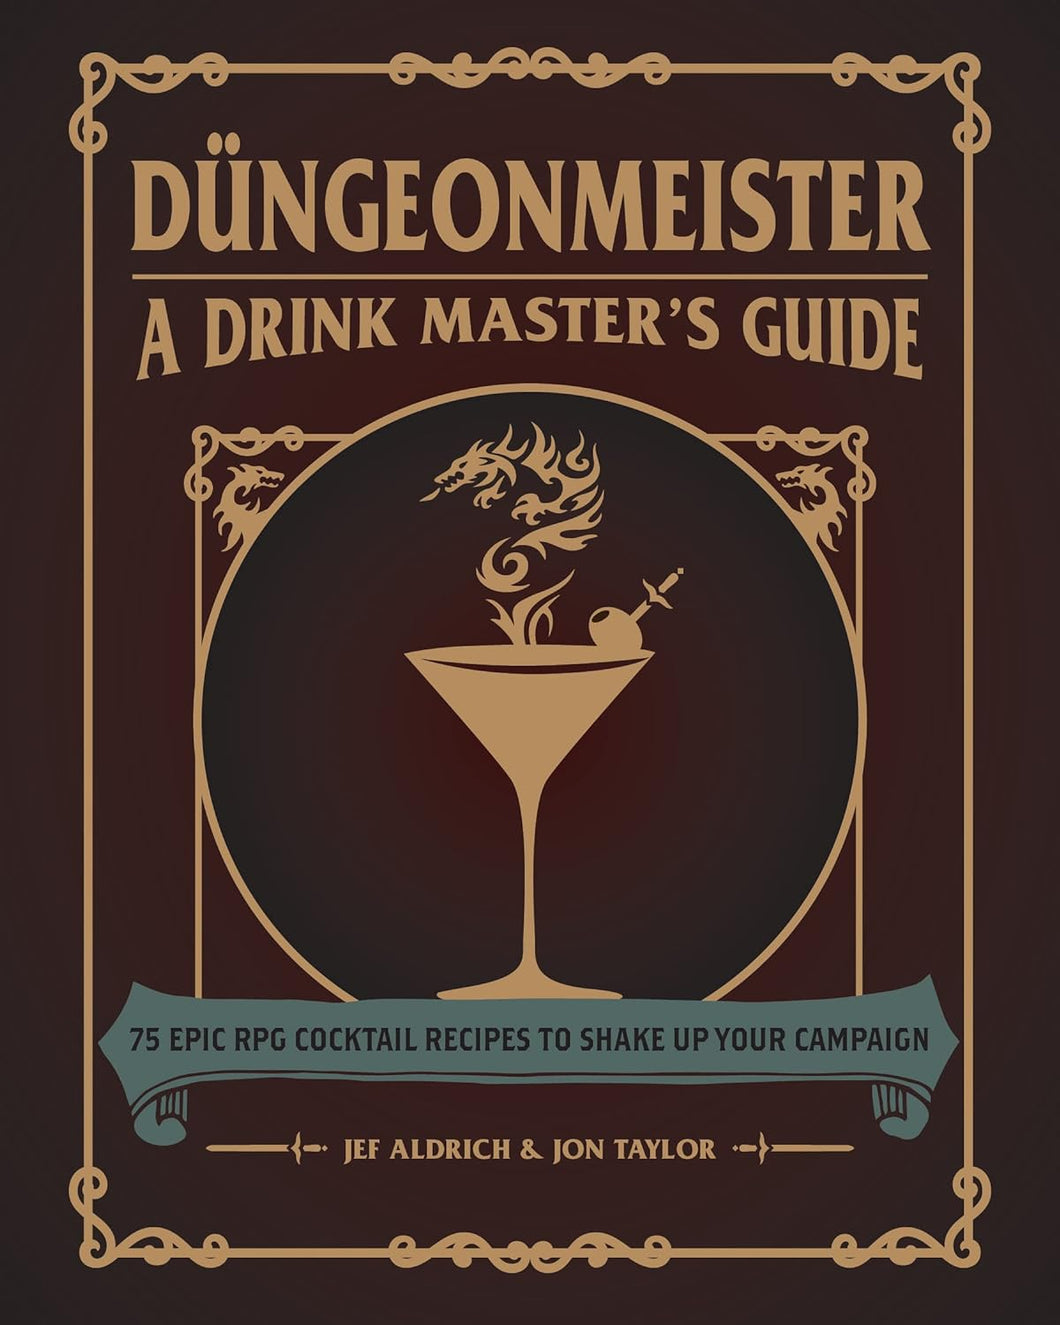 Düngeonmeister: 75 Epic RPG Cocktail Recipes to Shake Up Your Campaign by Jef Aldrich (Author), Jon Taylor (Author)